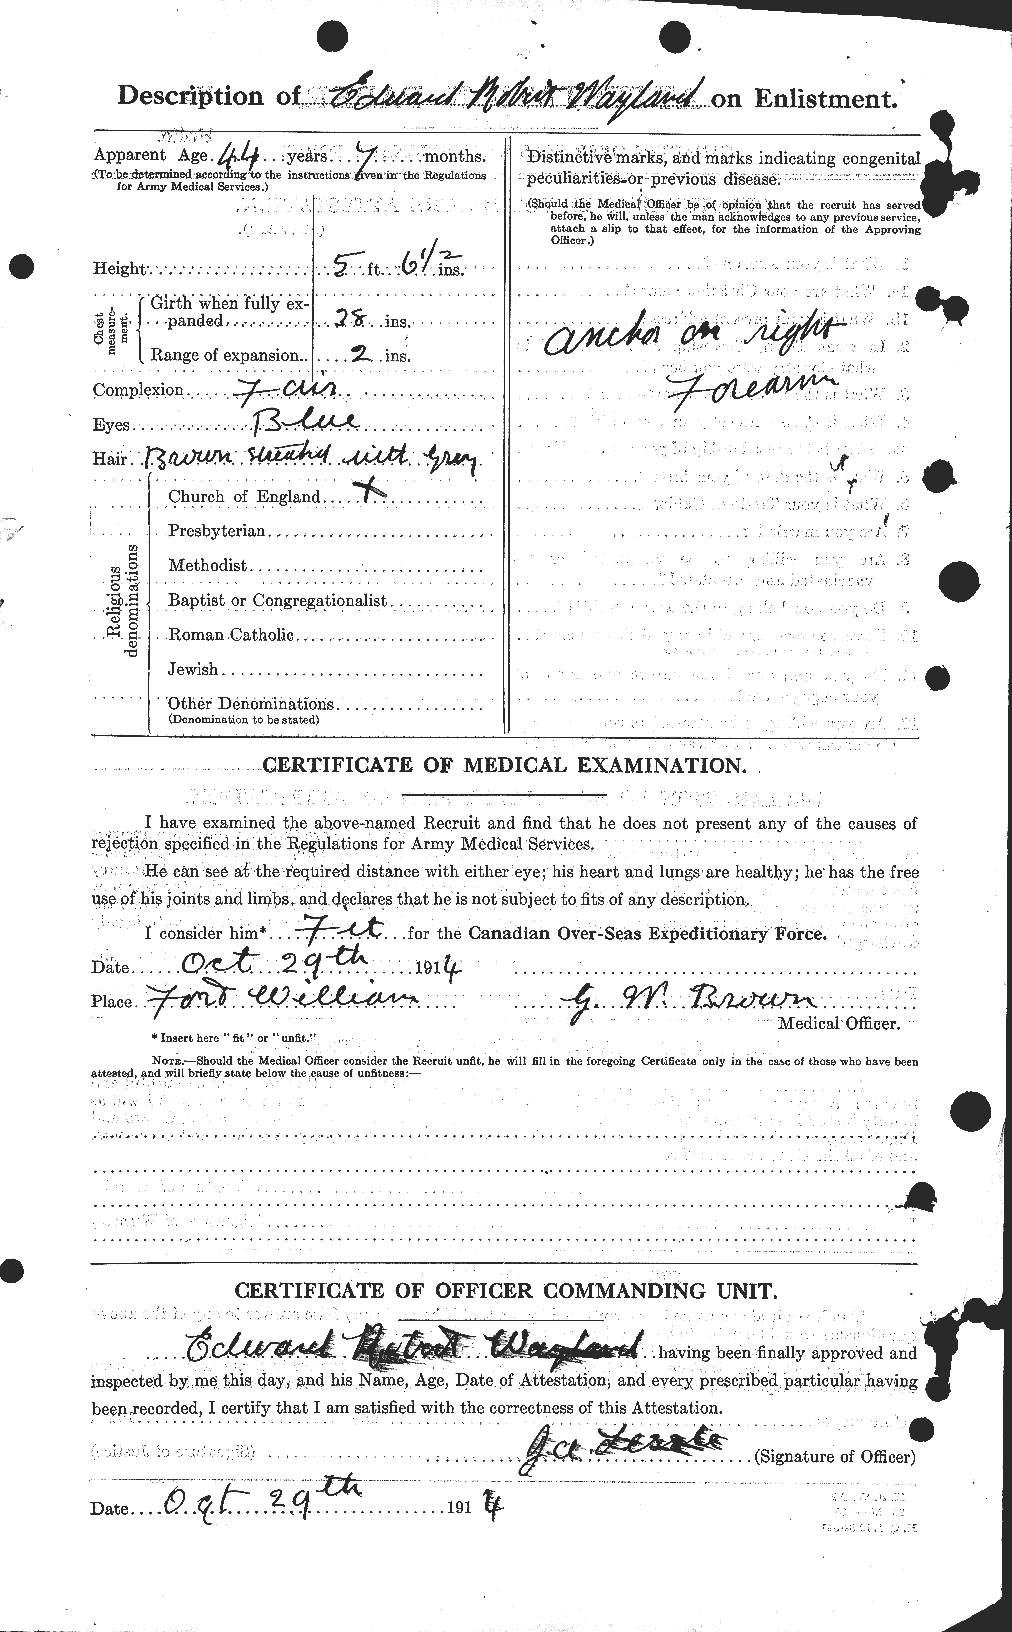 Personnel Records of the First World War - CEF 664003b